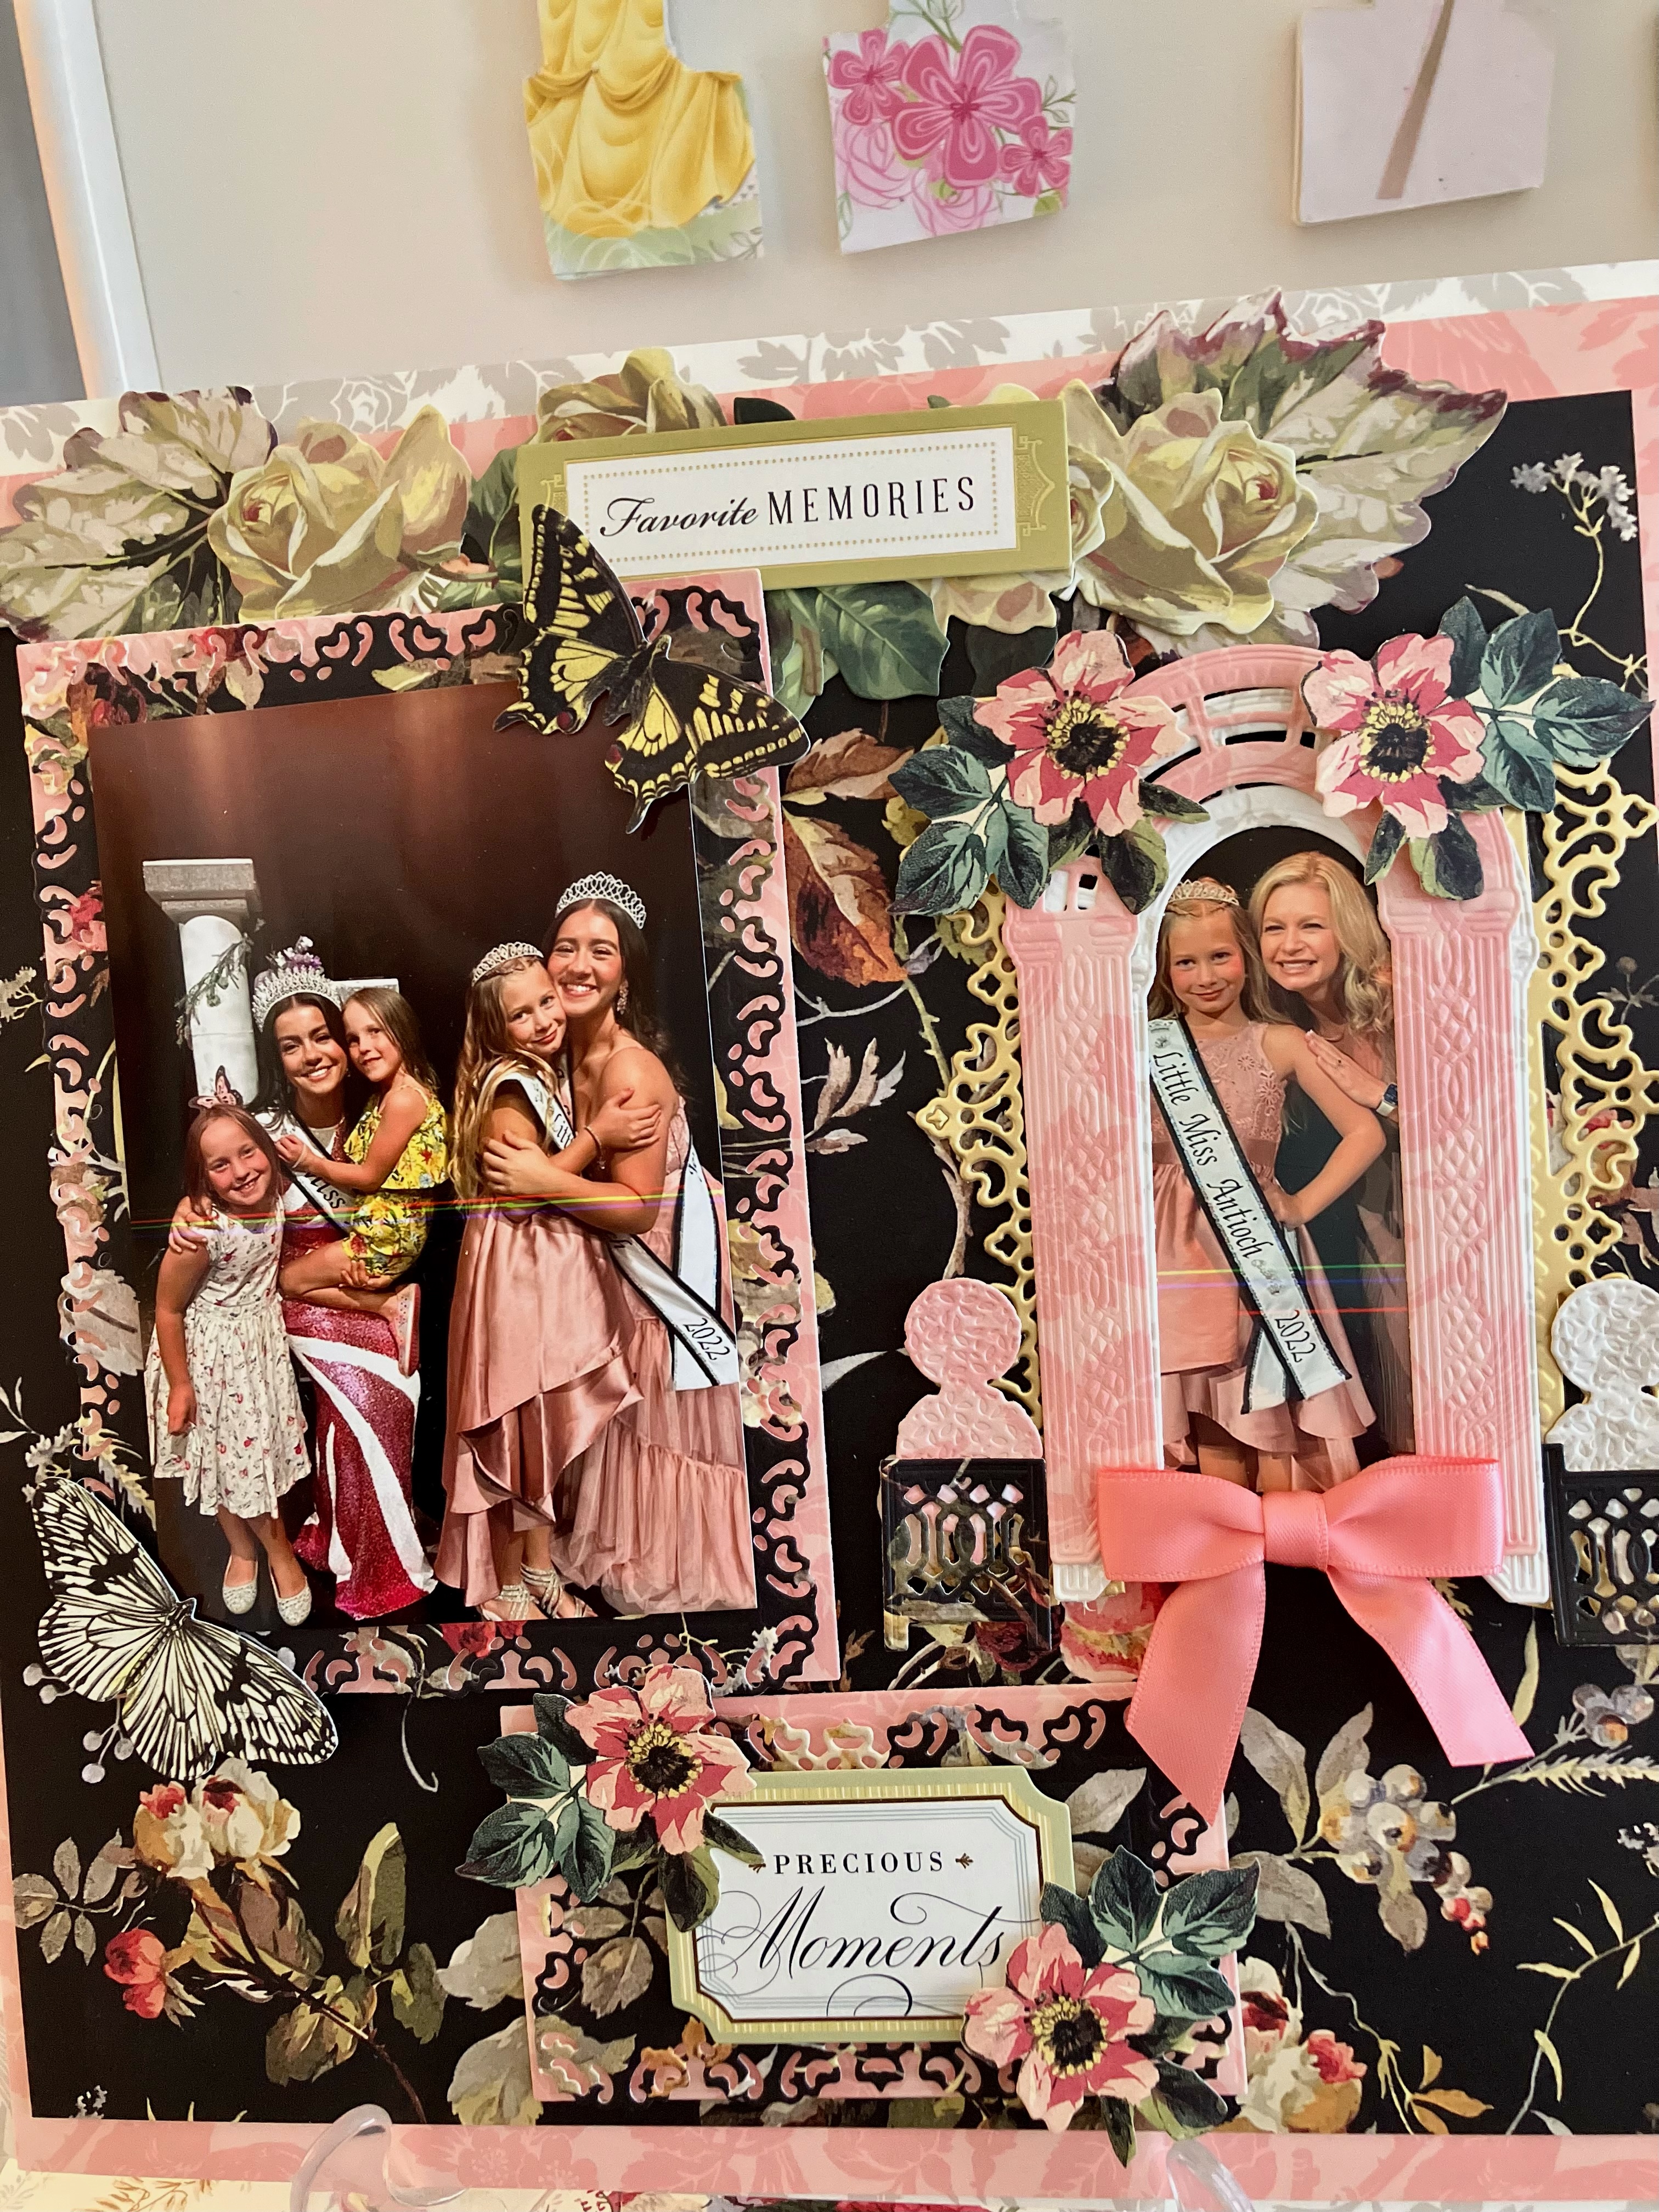 A scrapbook page with pictures of girls.